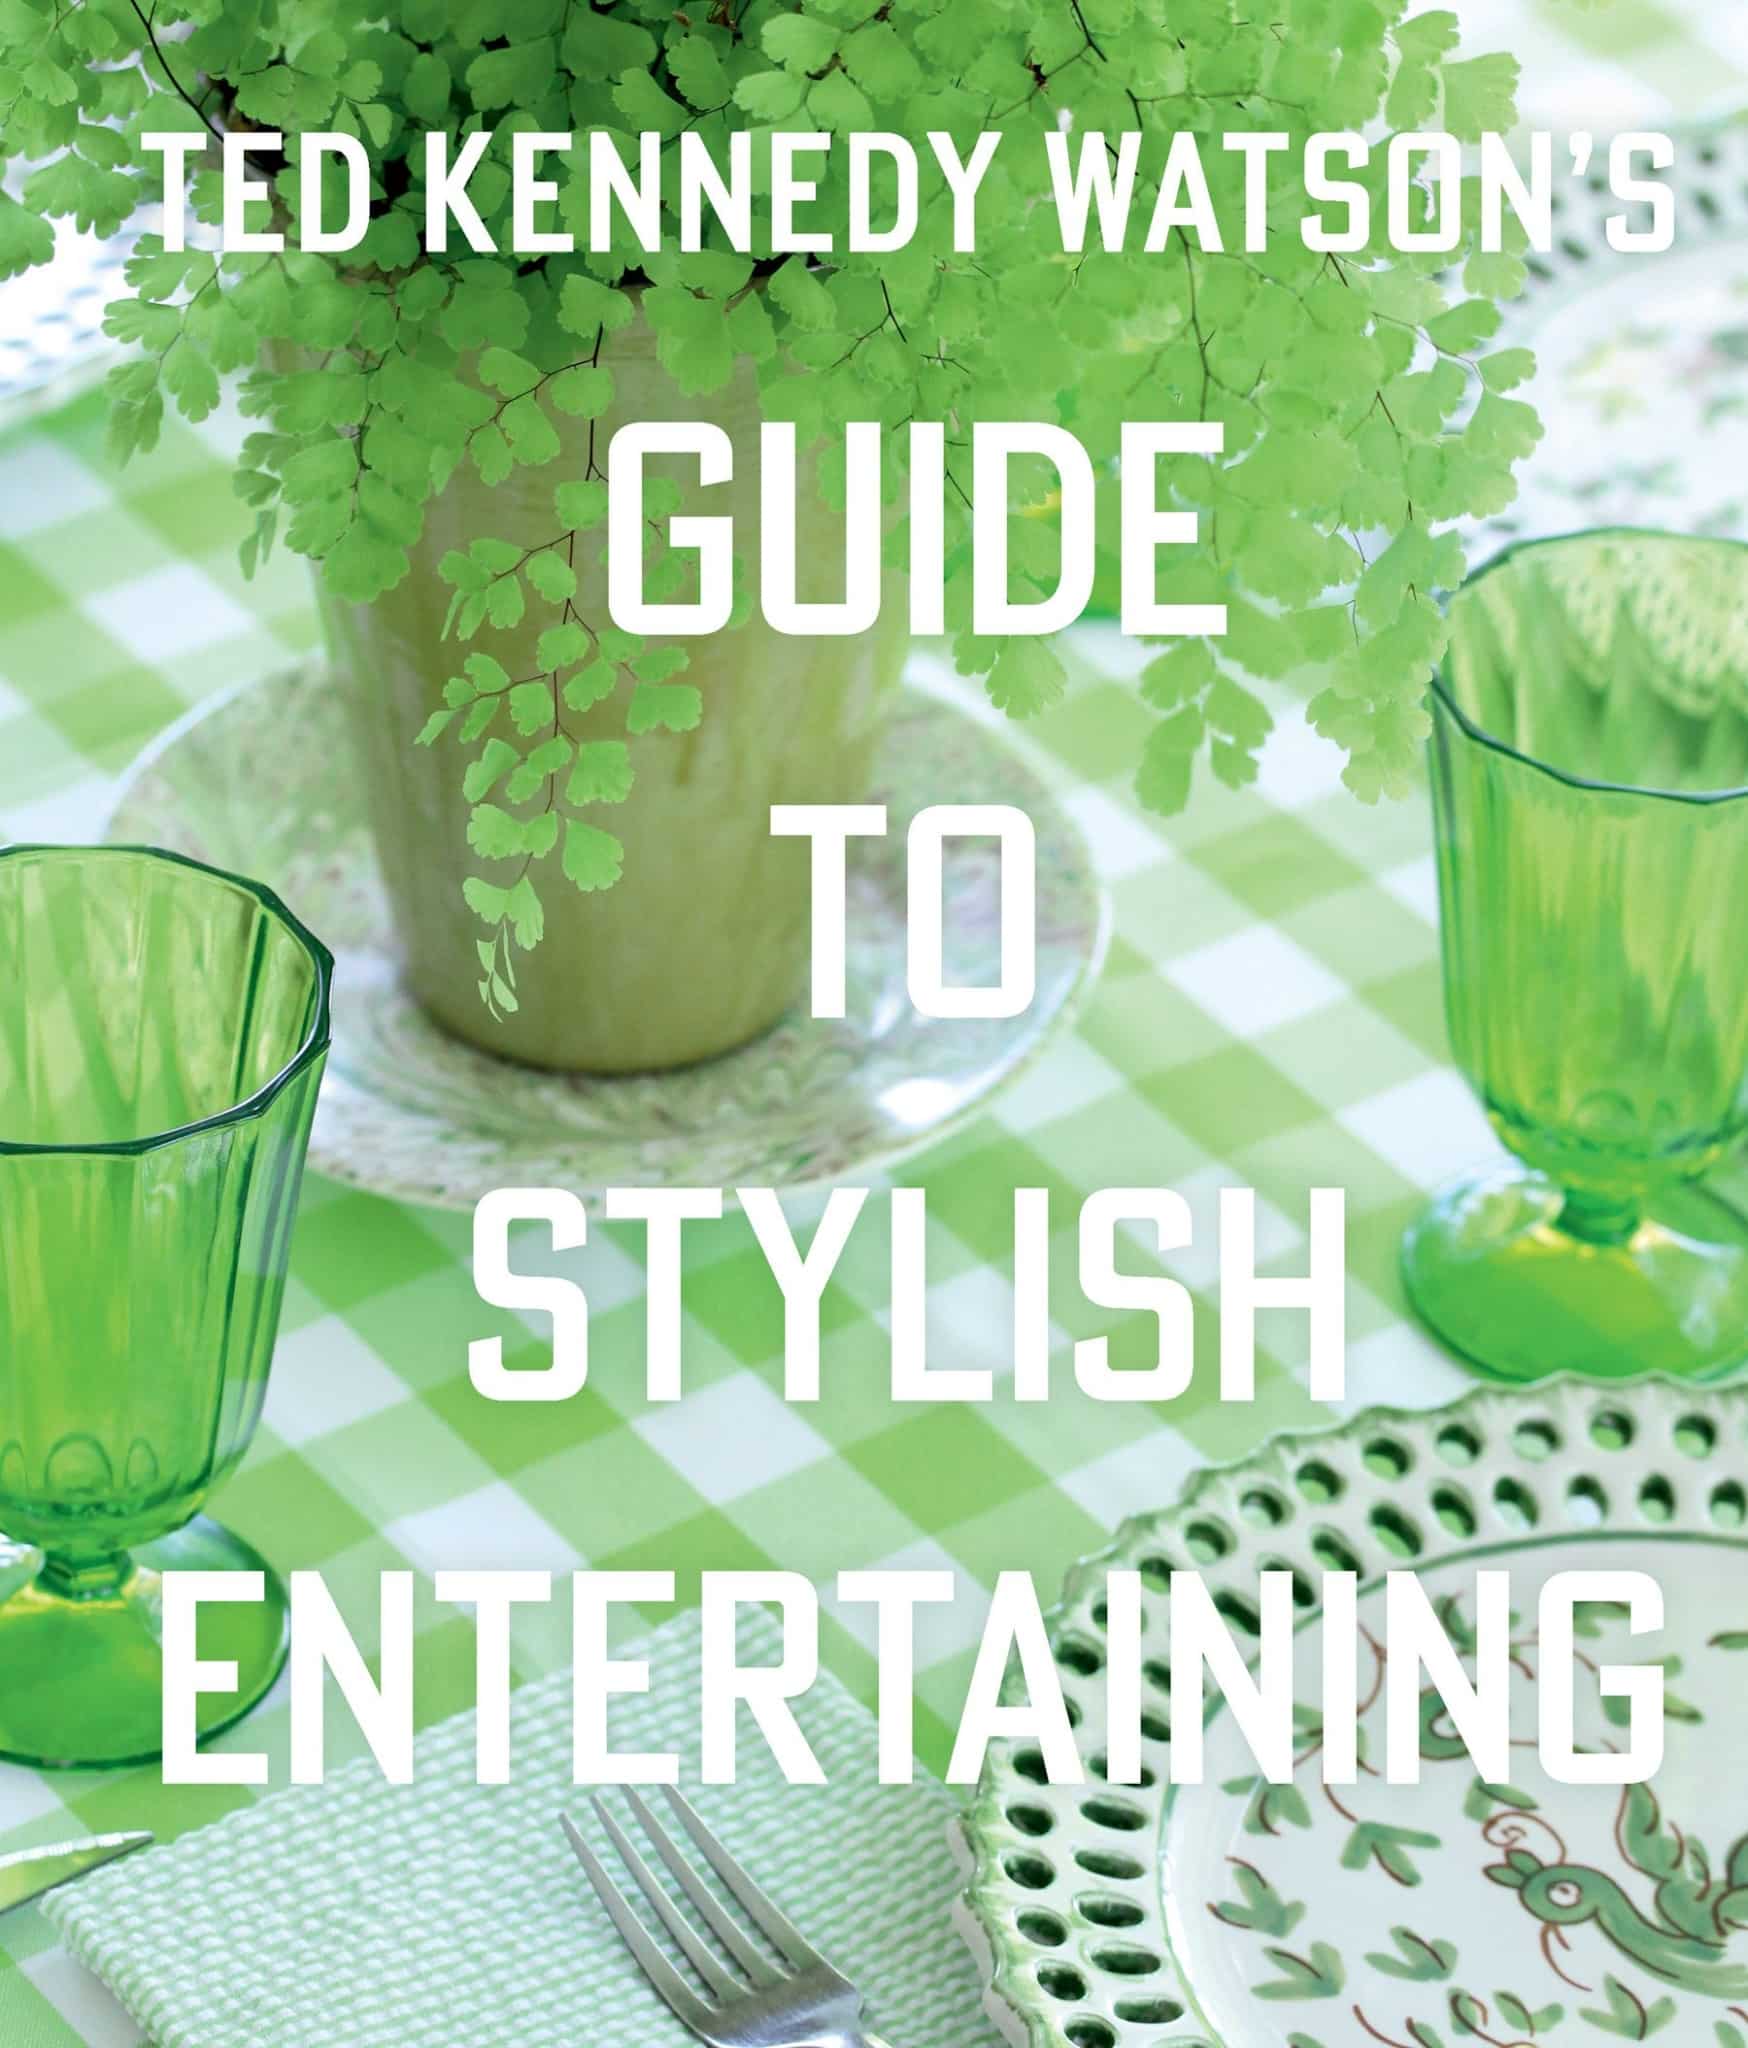 Ted Kennedy Watson 's Guide to Stylish Entertaining - coffee table book - party - entertaining - entertaining guide